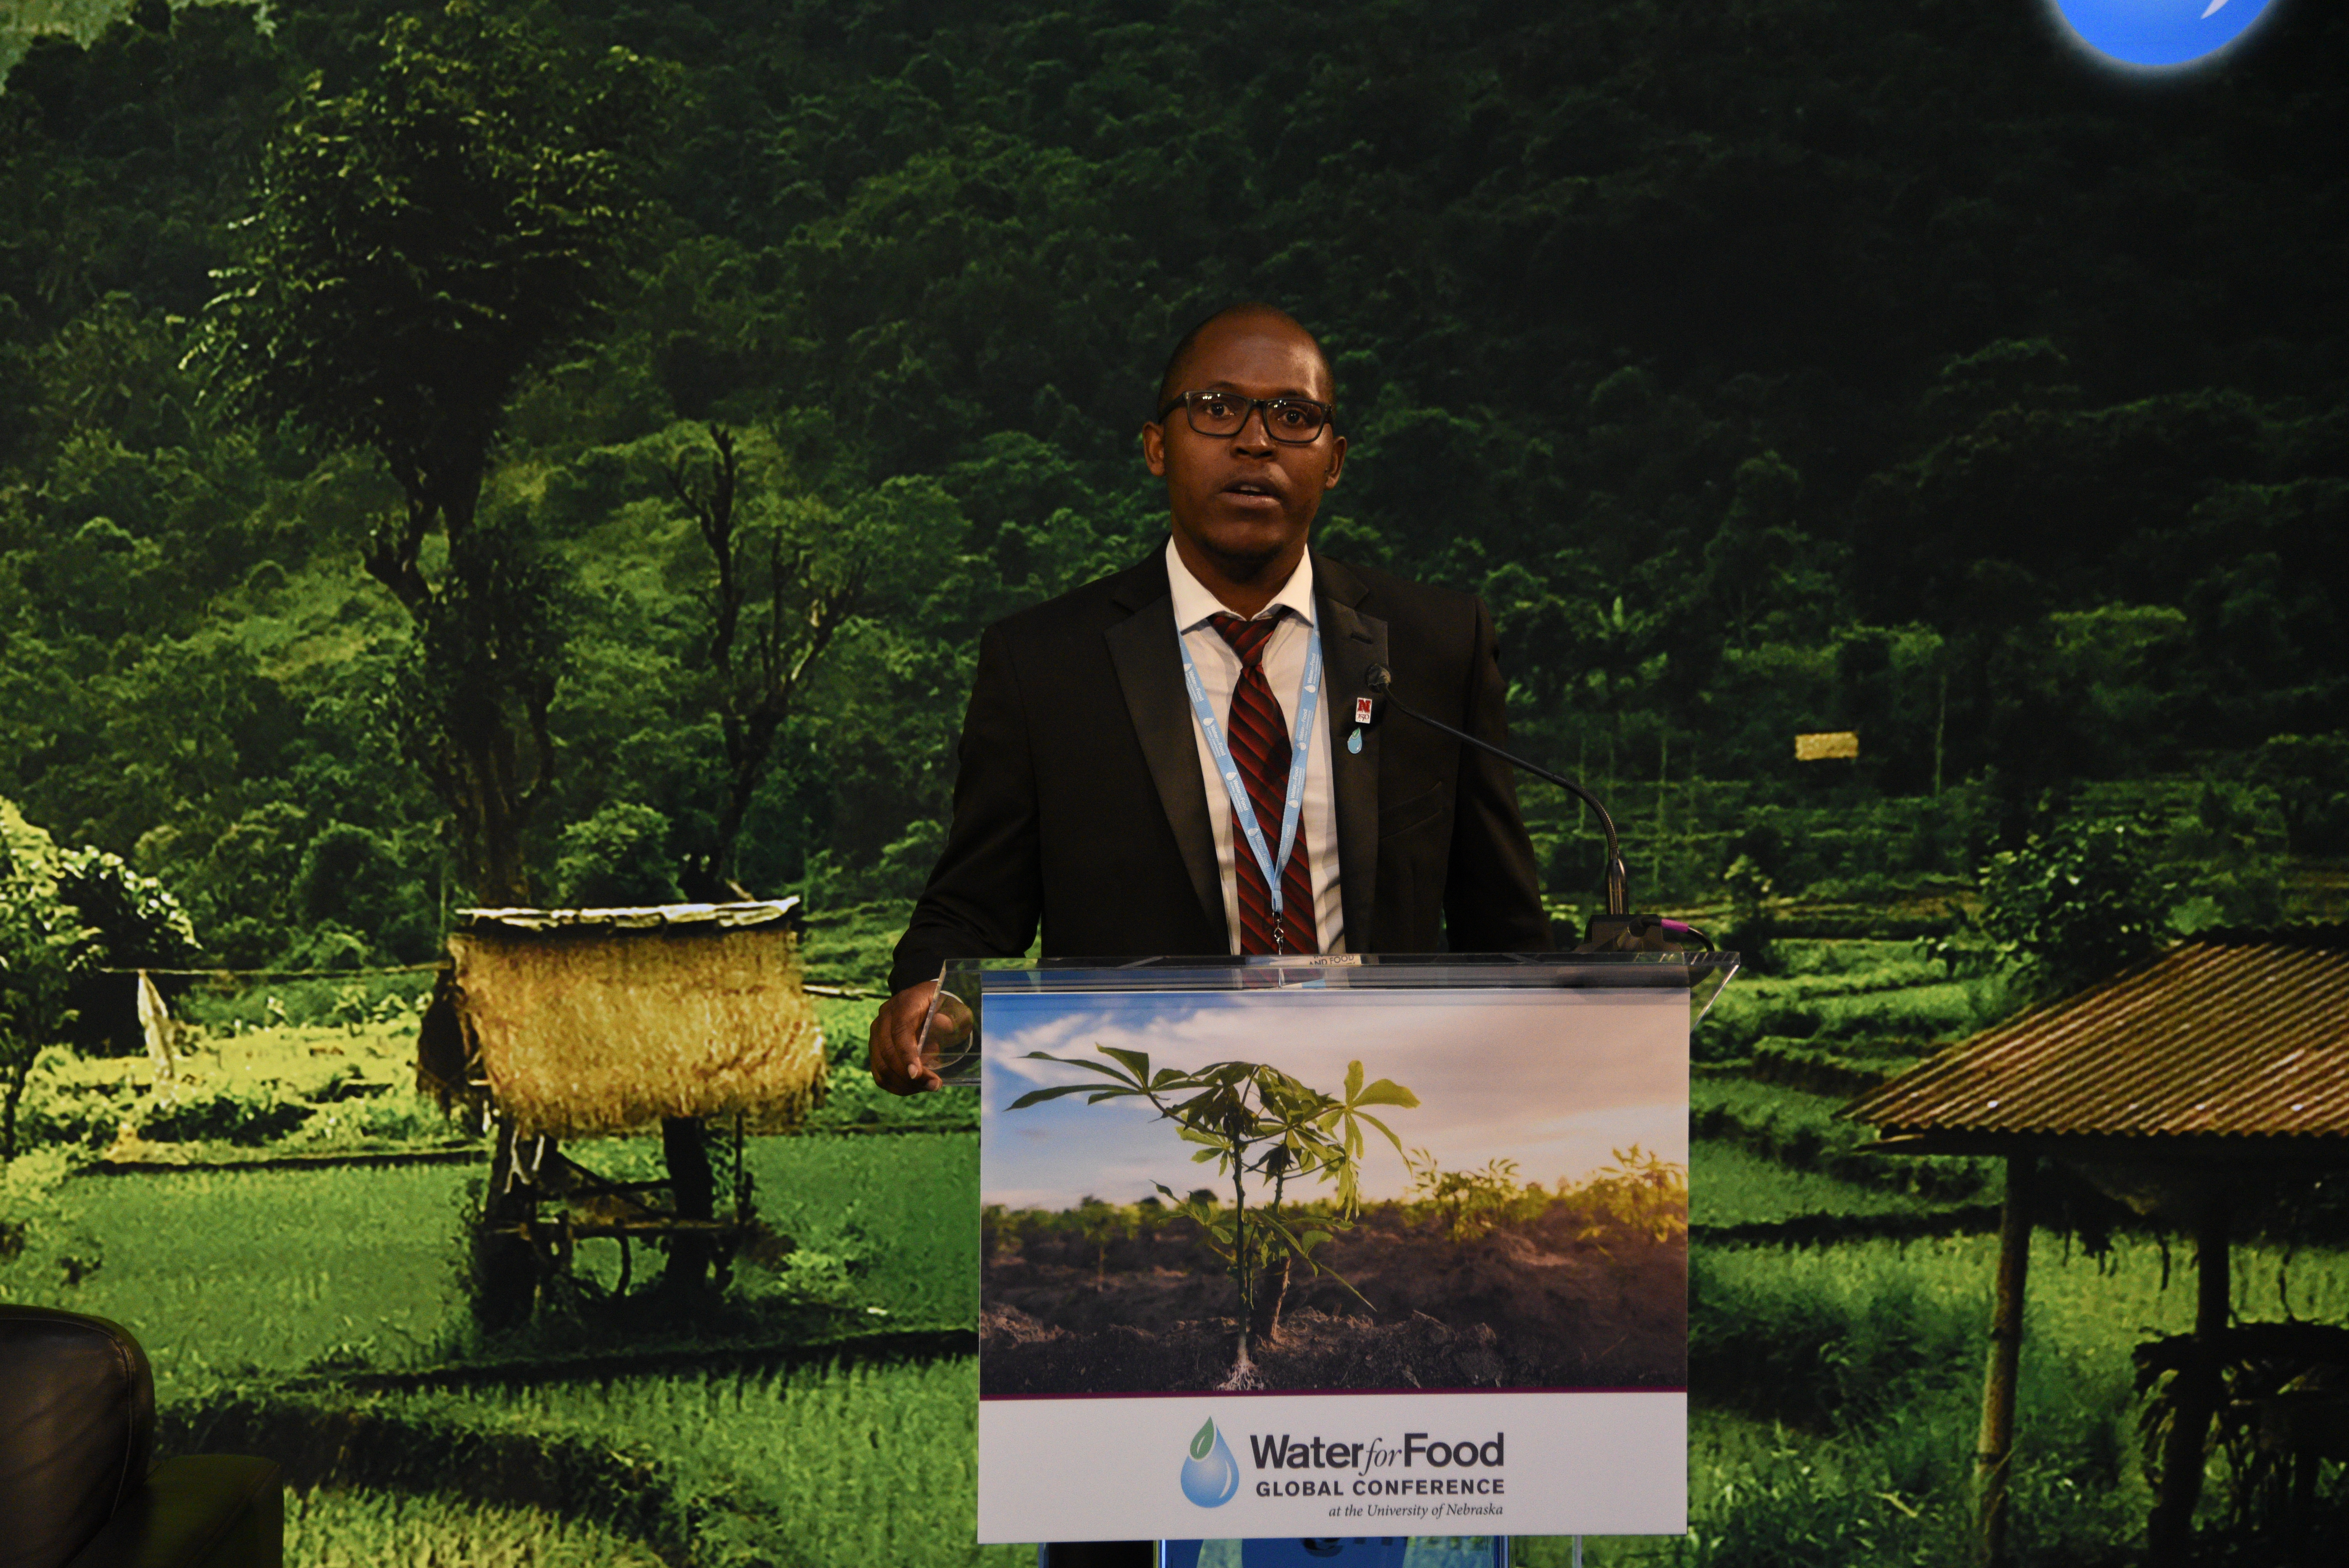 Mavuto Banda speaks about his international education experience at the Water for Food Global Conference